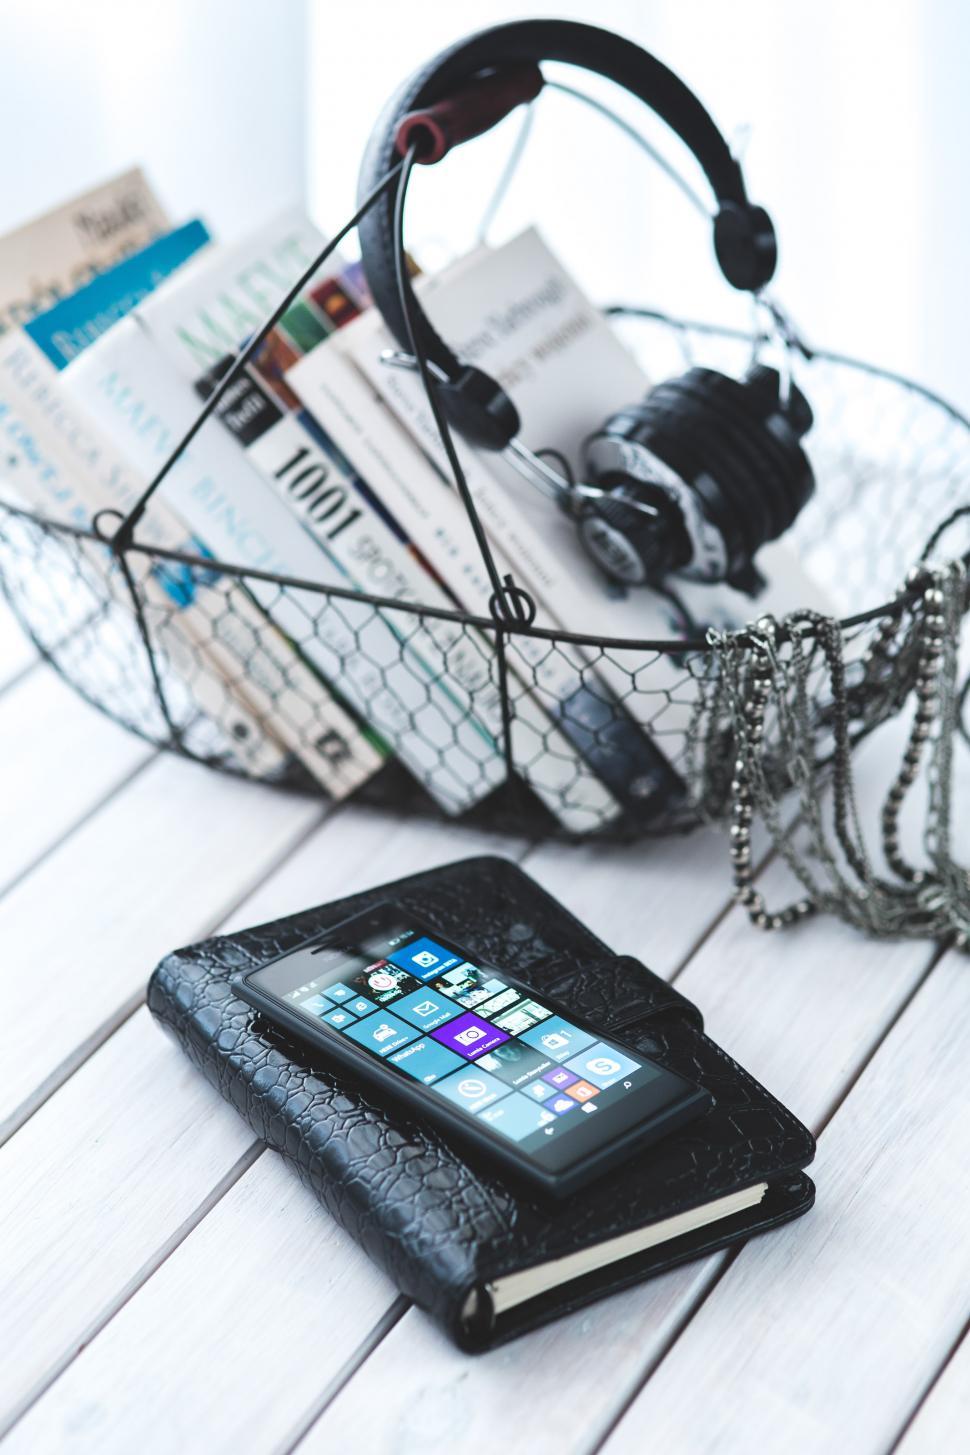 Free Image of Cell Phone Next to Basket of Books 